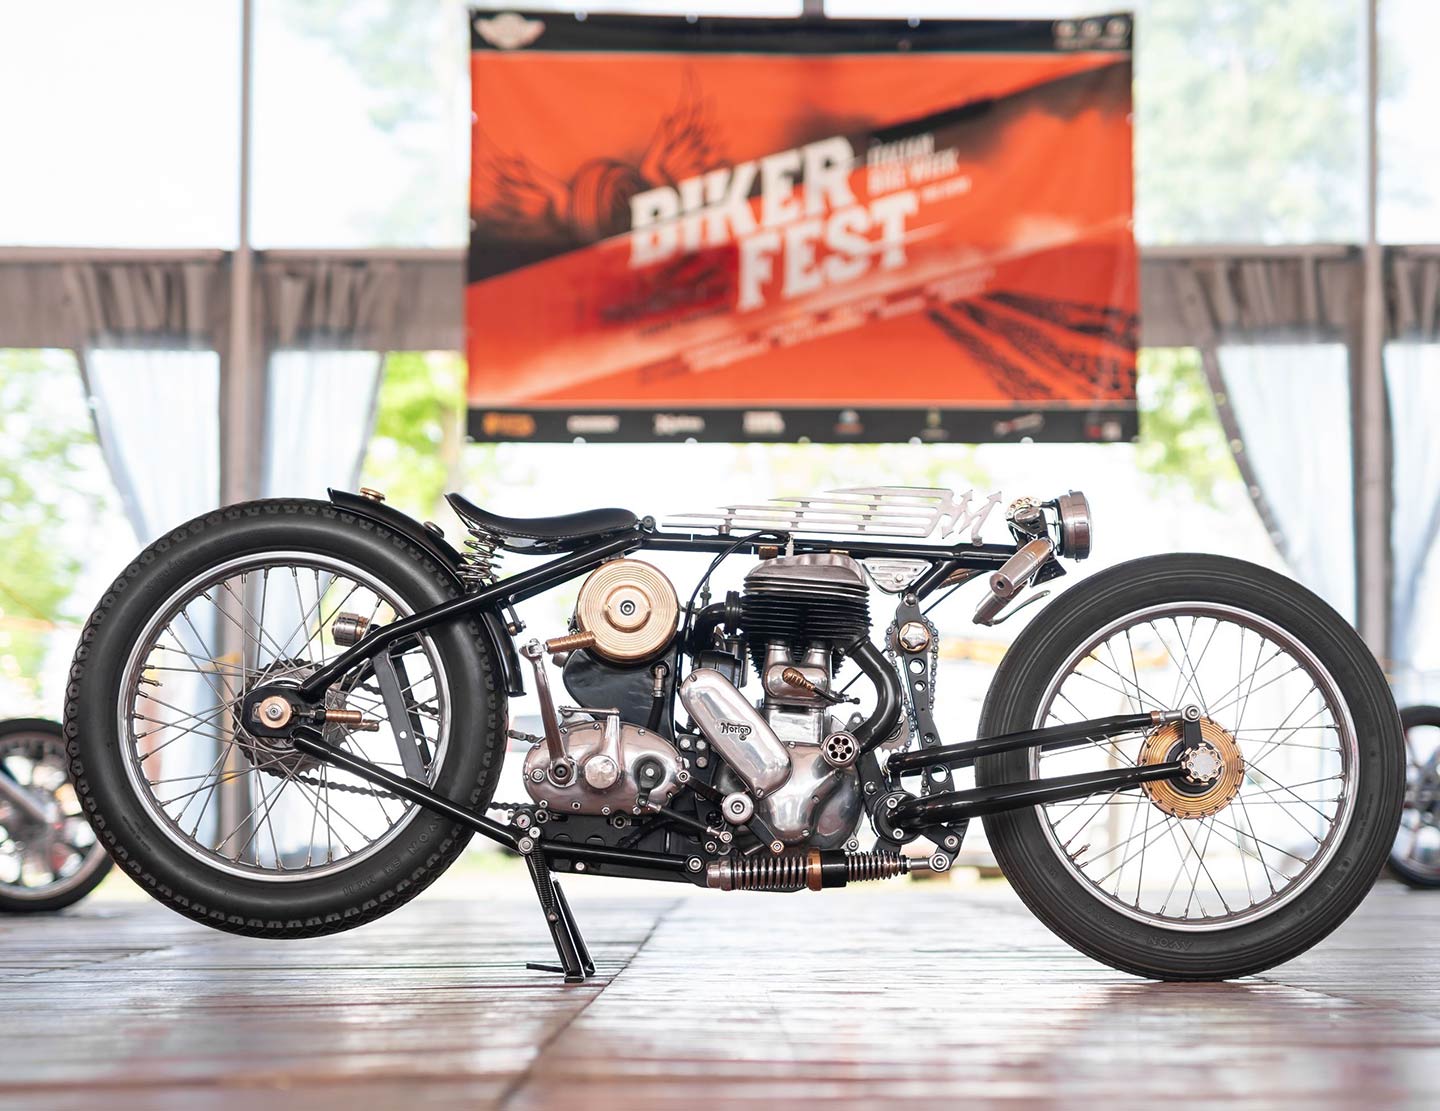 How about this gorgeous single-cylinder Norton dubbed “La Mona”? The build came out of Italy’s Mannaia Workshop, and won second place in the AMD group.